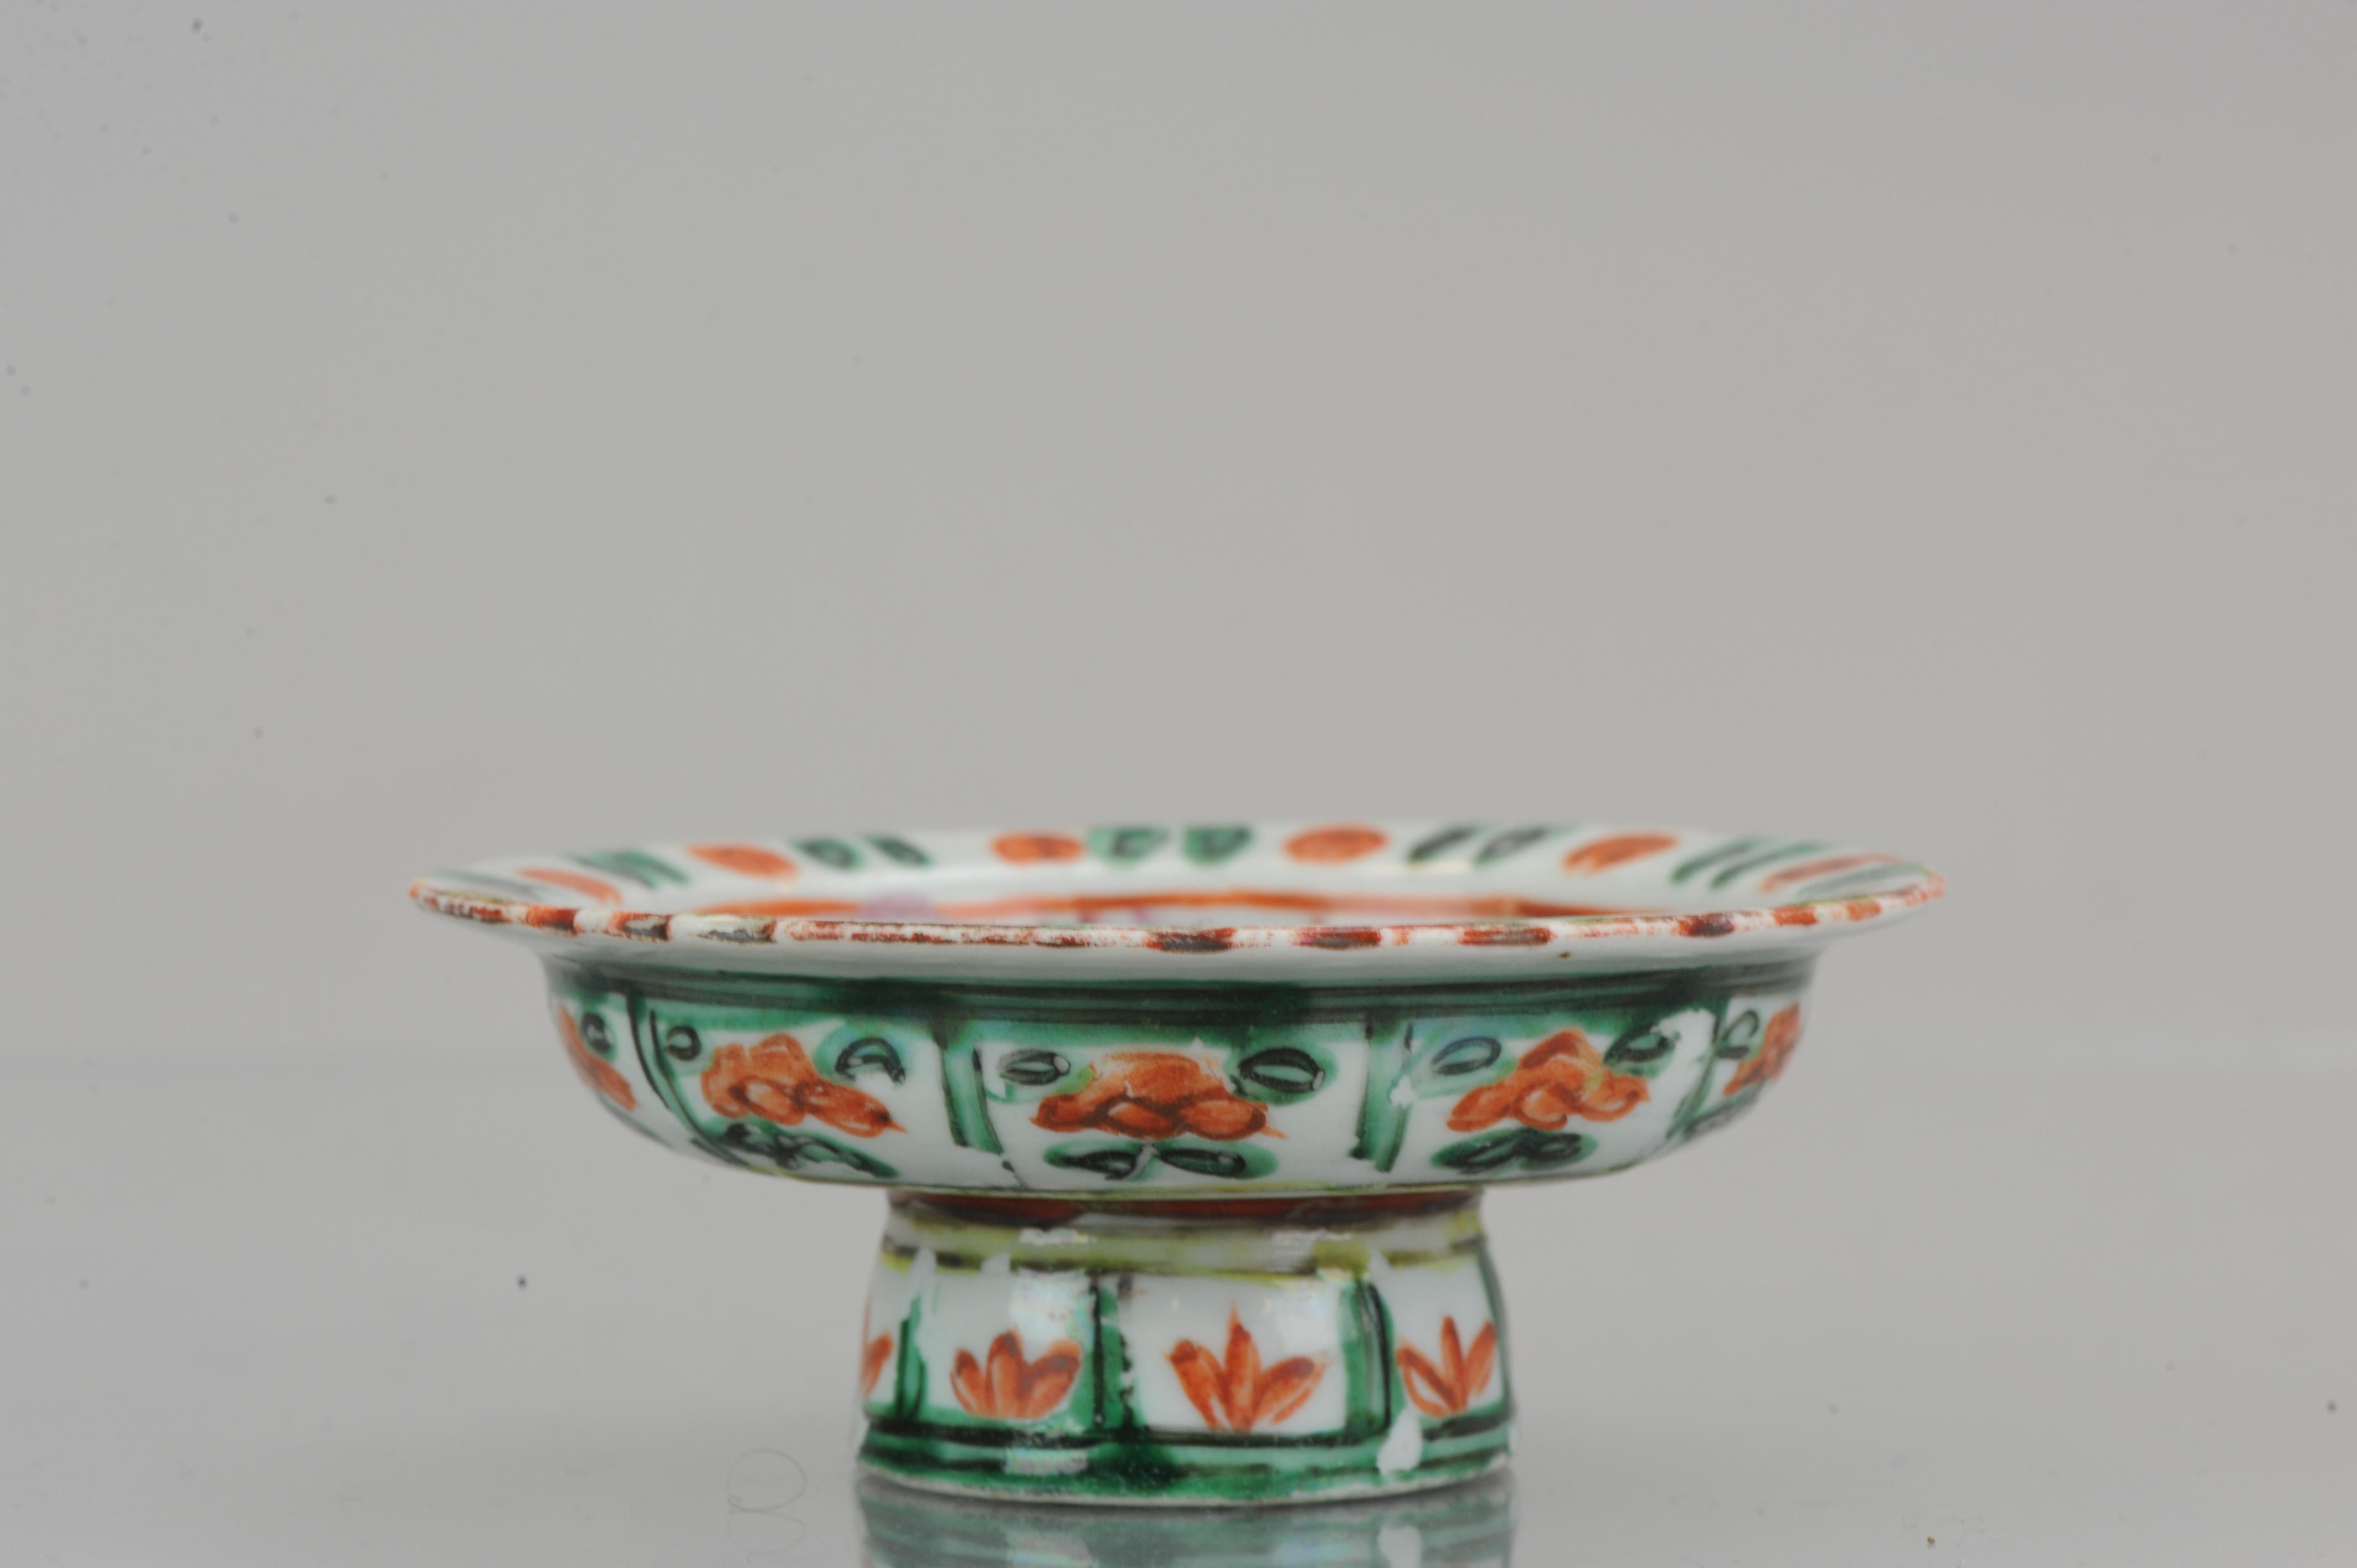 Antique Chinese Porcelain SE Asia Mandarin Rose Tazza Thailand China, 19th Century.

Nice, rare and beautifull.

Additional information:
Material: Porcelain
Type: Altar Dish
Region of Origin: China
Period: 18th century, 19th century Qing (1661 -